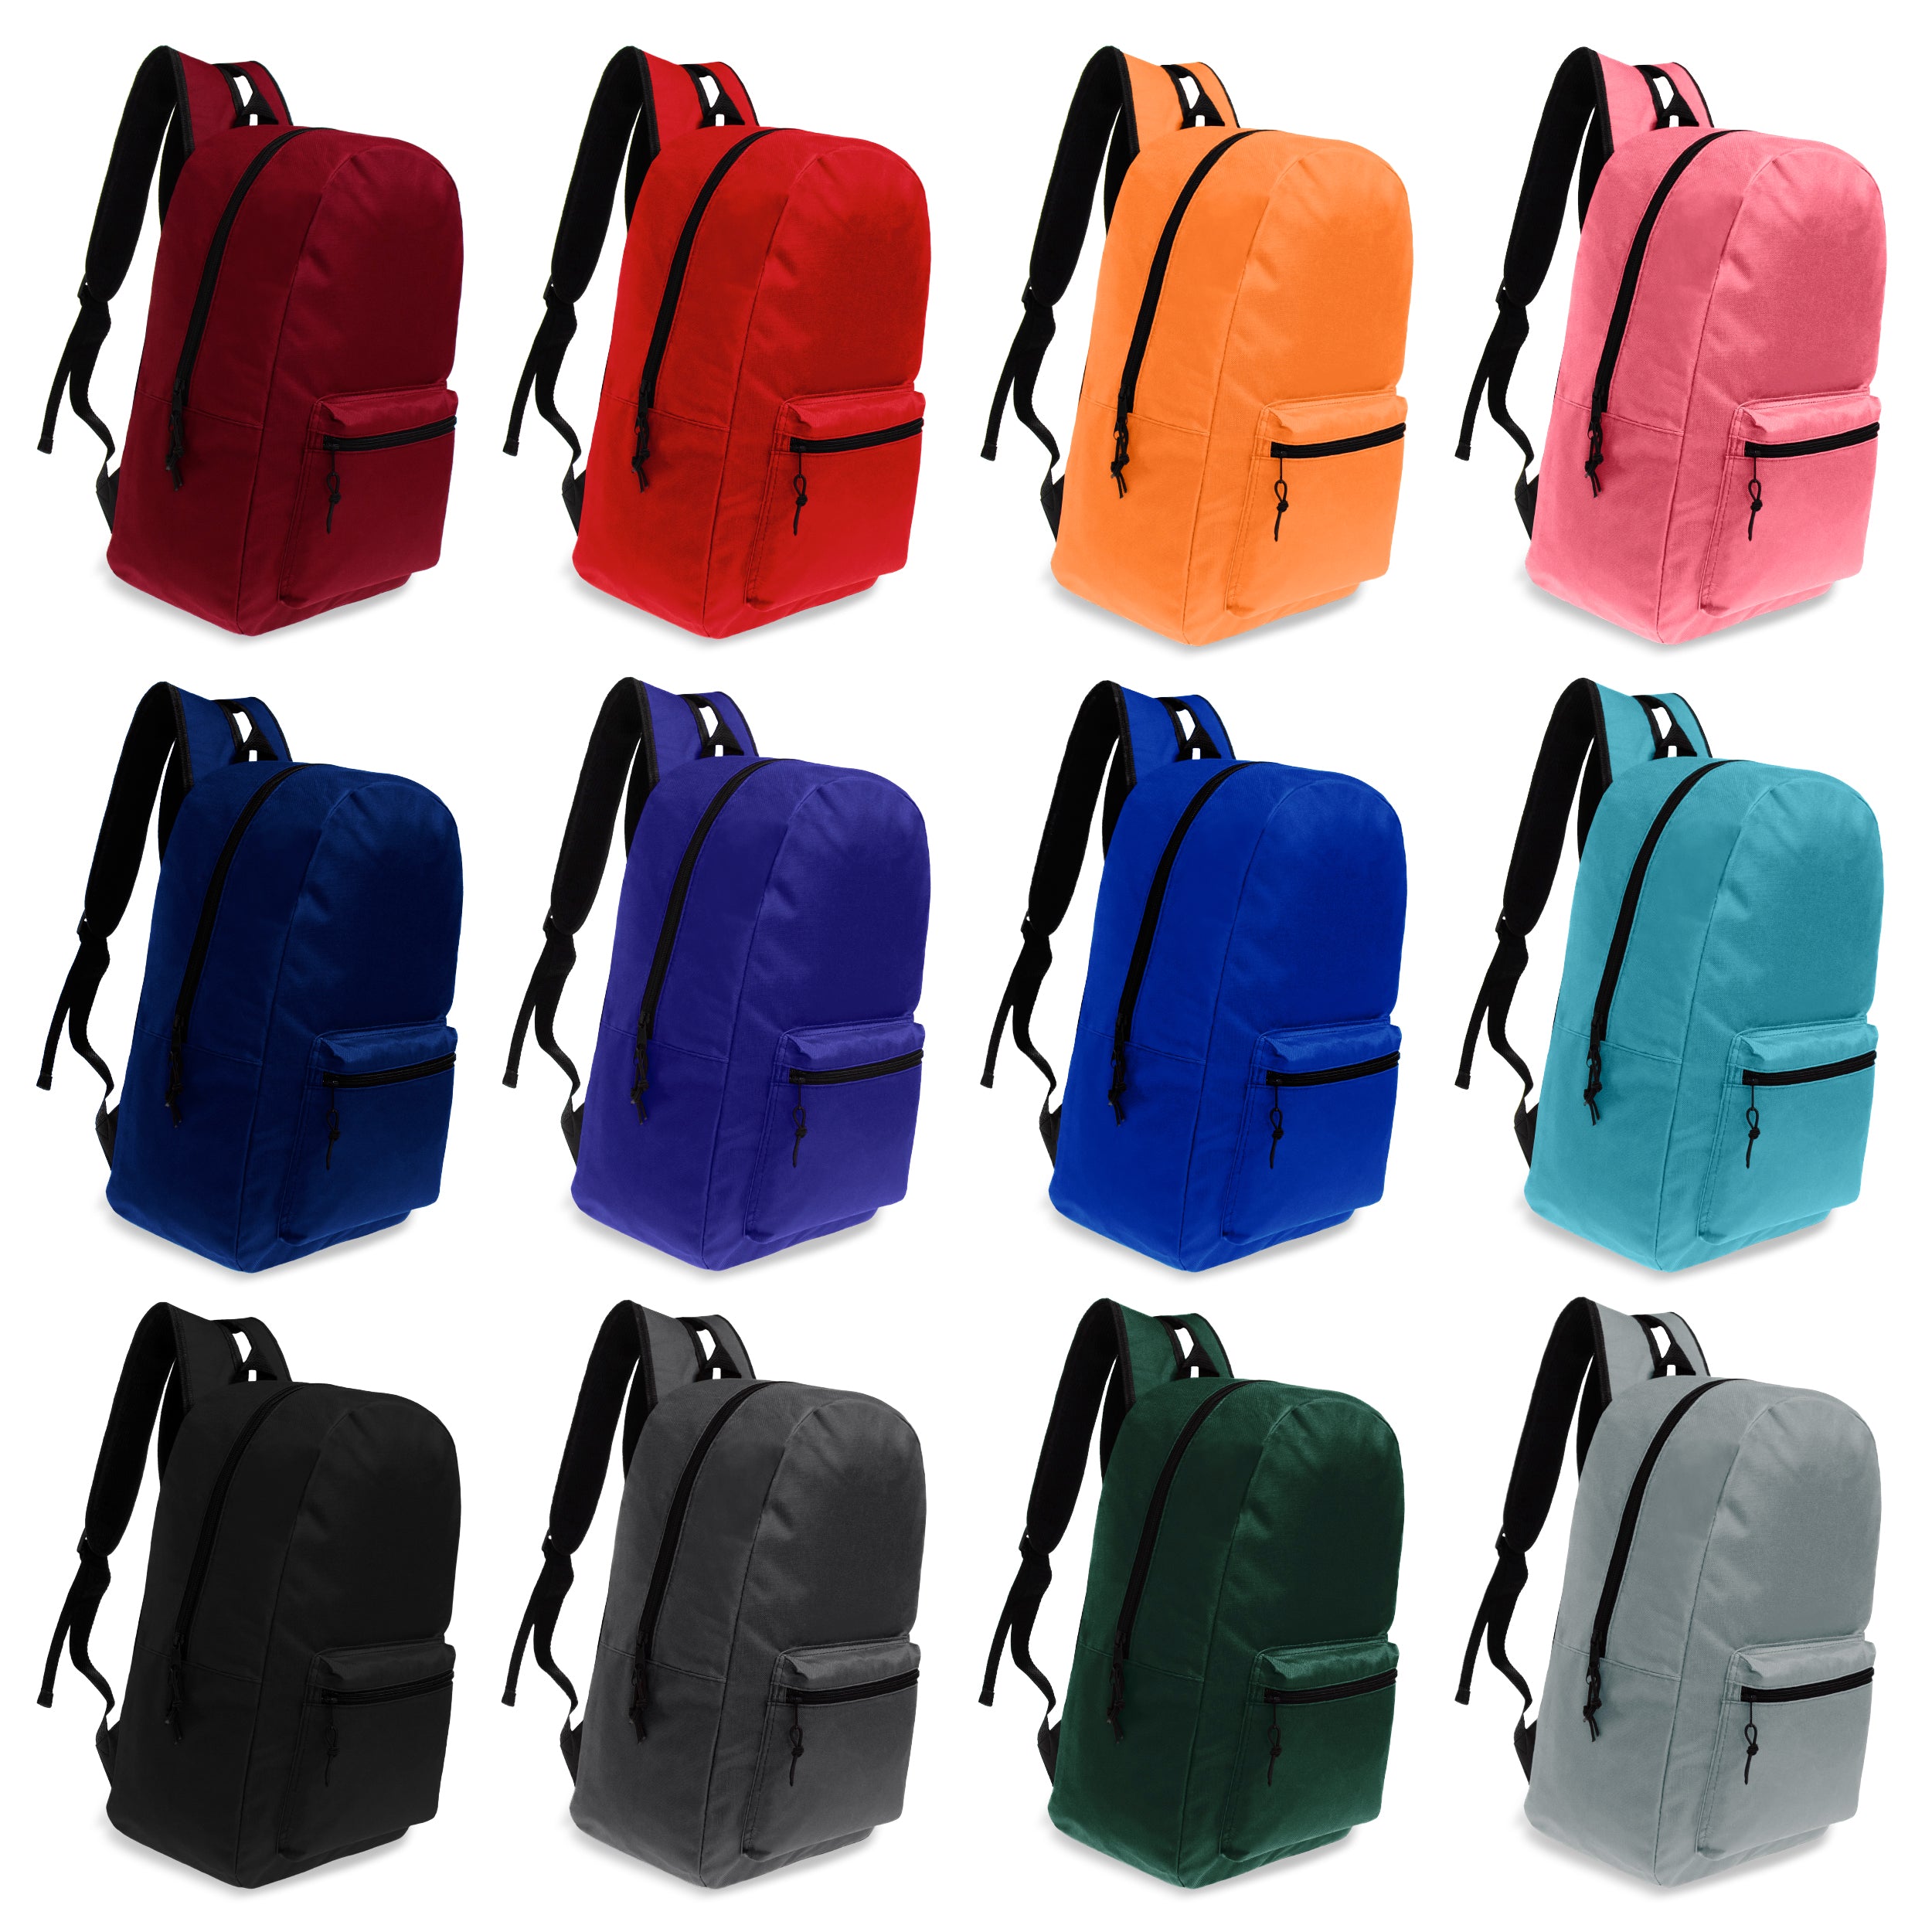 17 Inch Bulk Backpacks in Assorted Colors with 17 Piece School Supply Kits Wholesale - Case of 24 (12 Color Assortment)